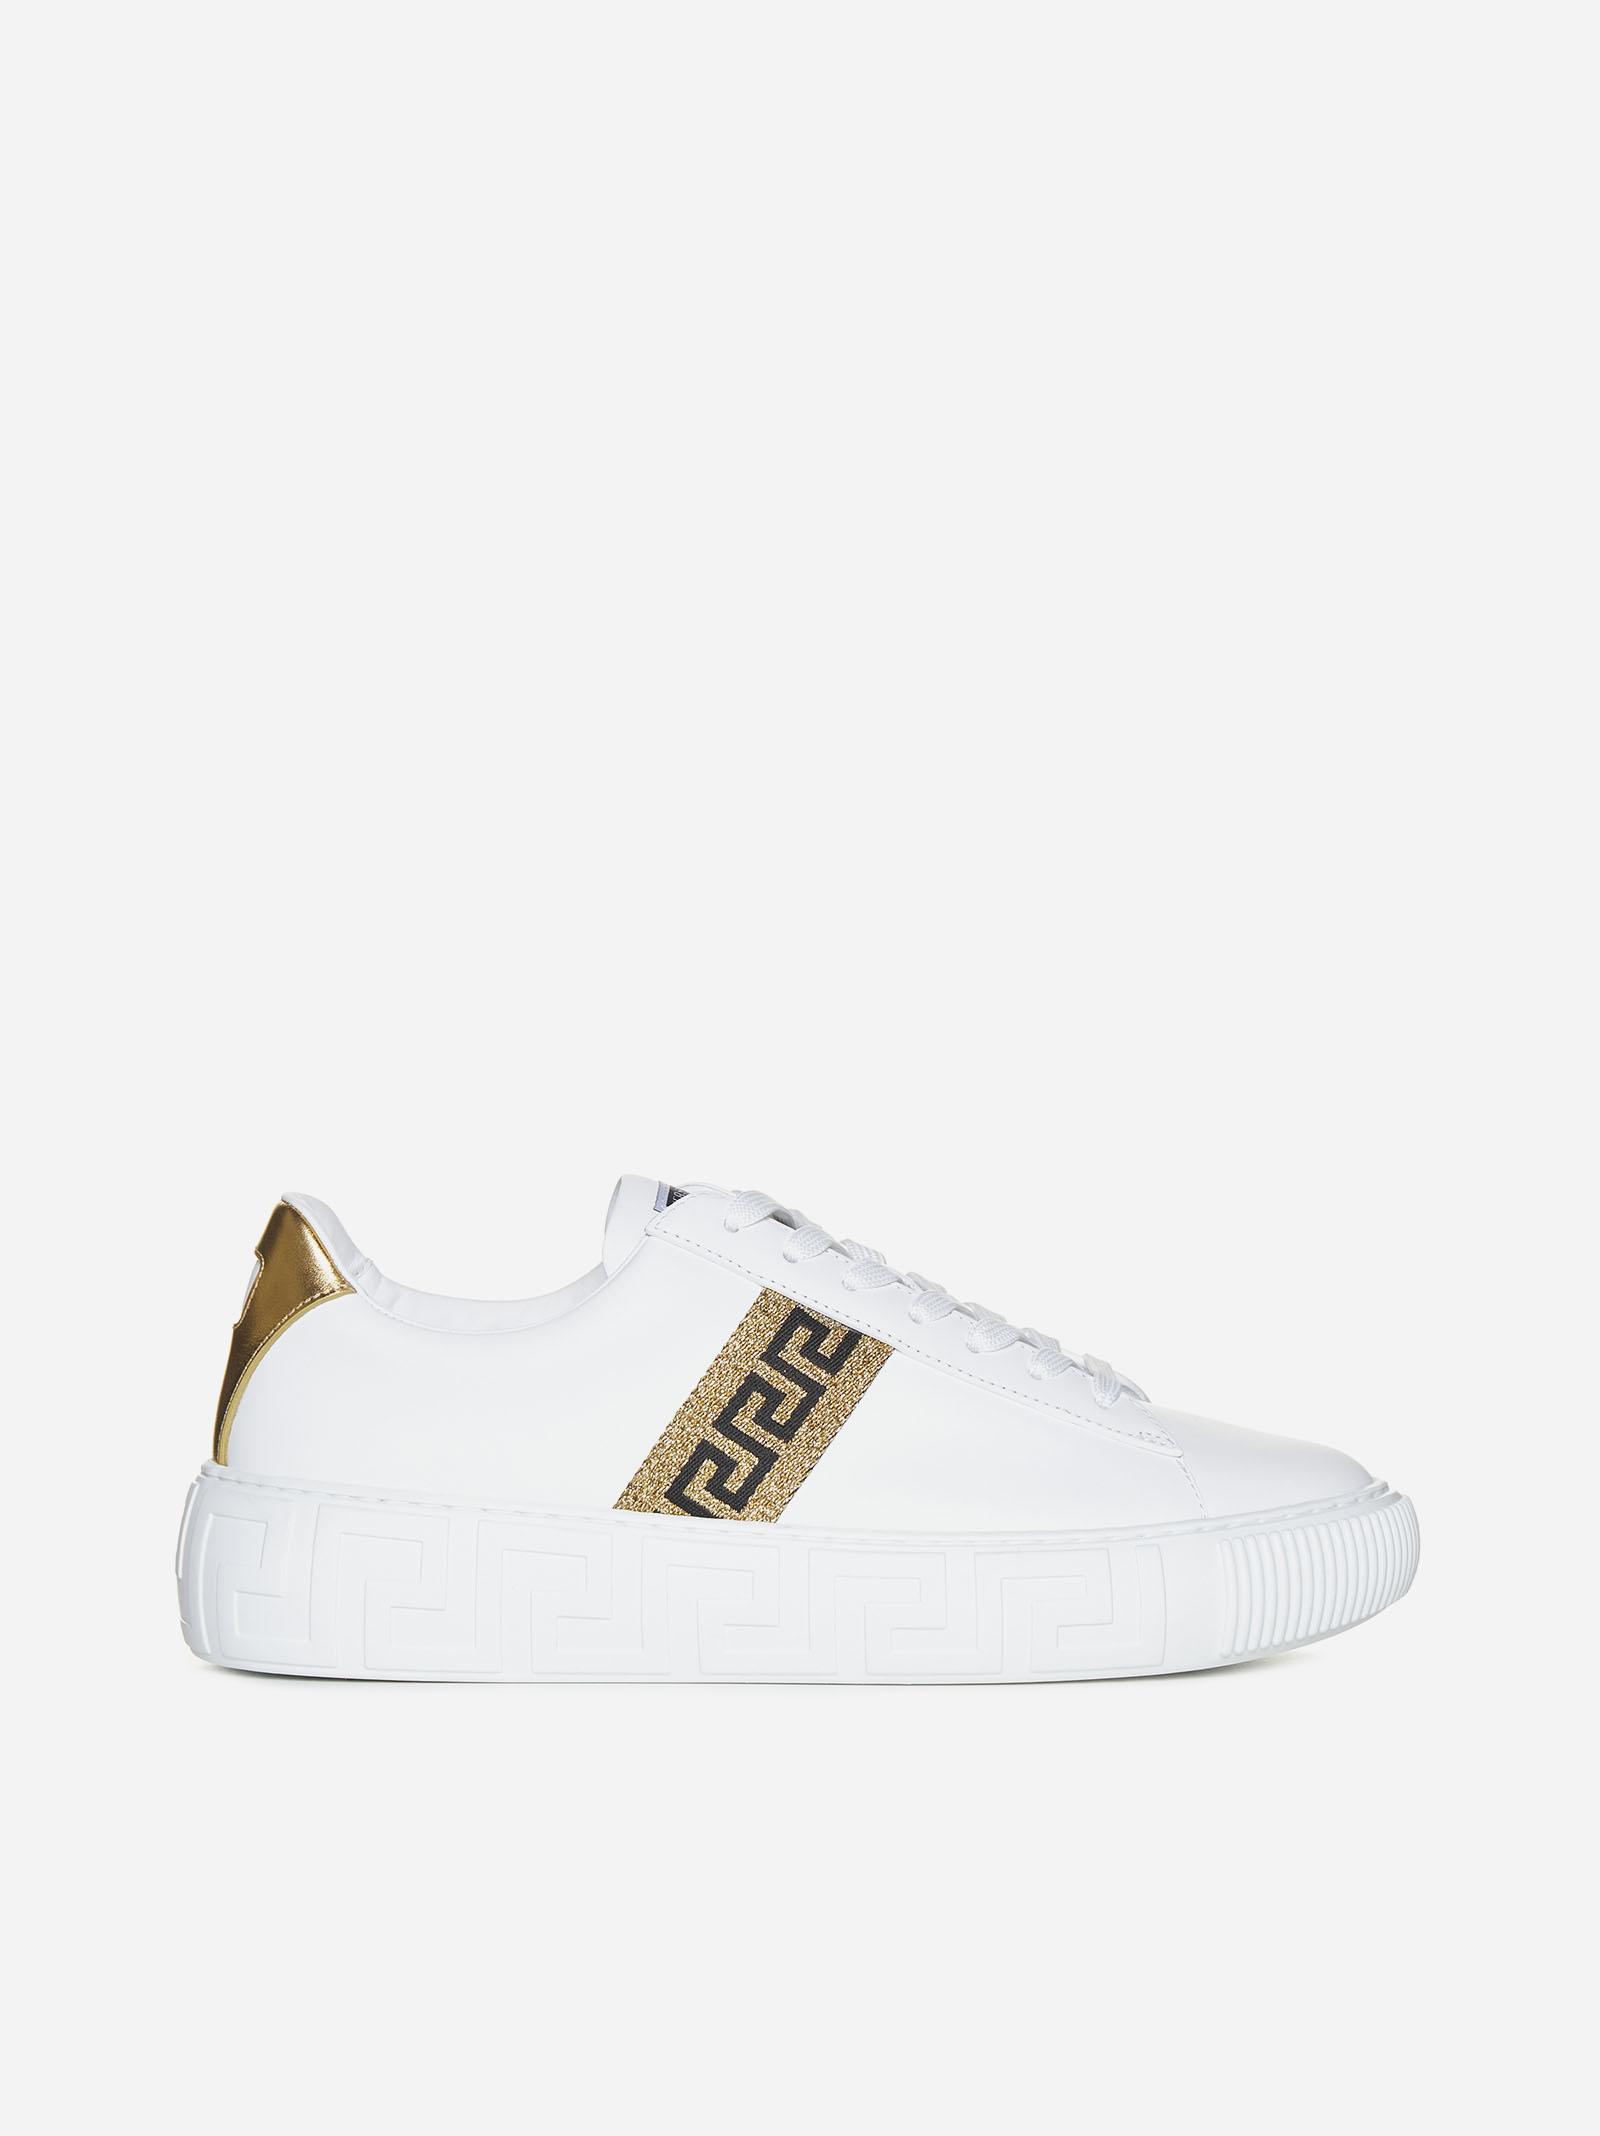 Versace Logo Leather Sneakers in Natural for Men | Lyst